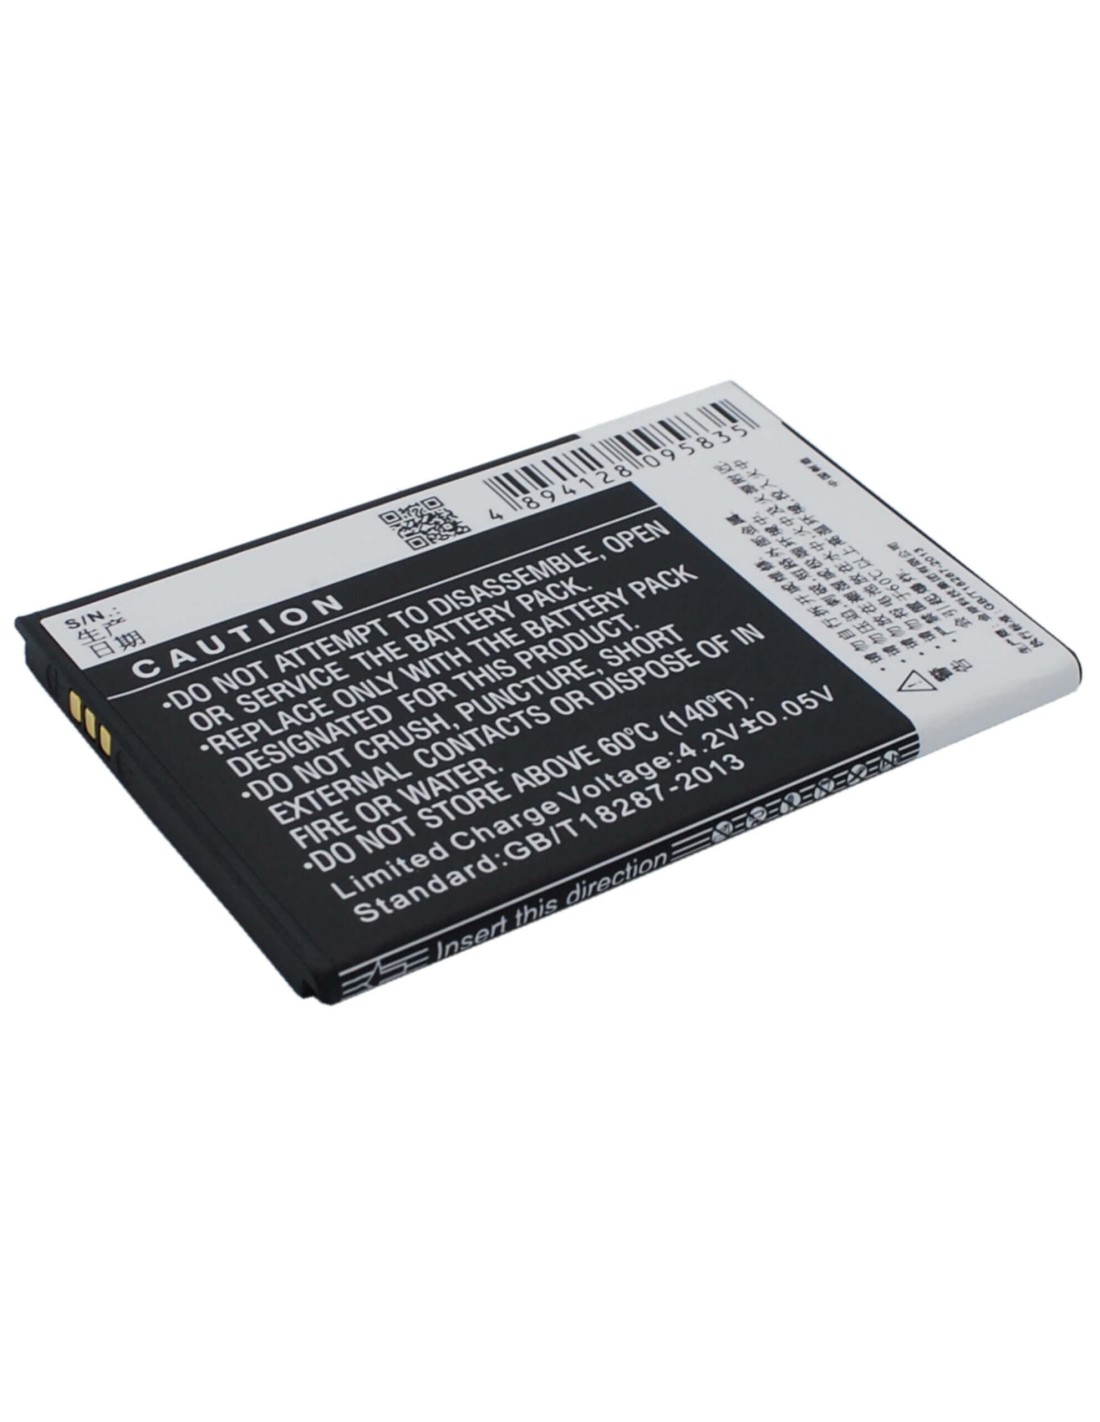 Battery for Coolpad 8020 3.7V, 1600mAh - 5.92Wh